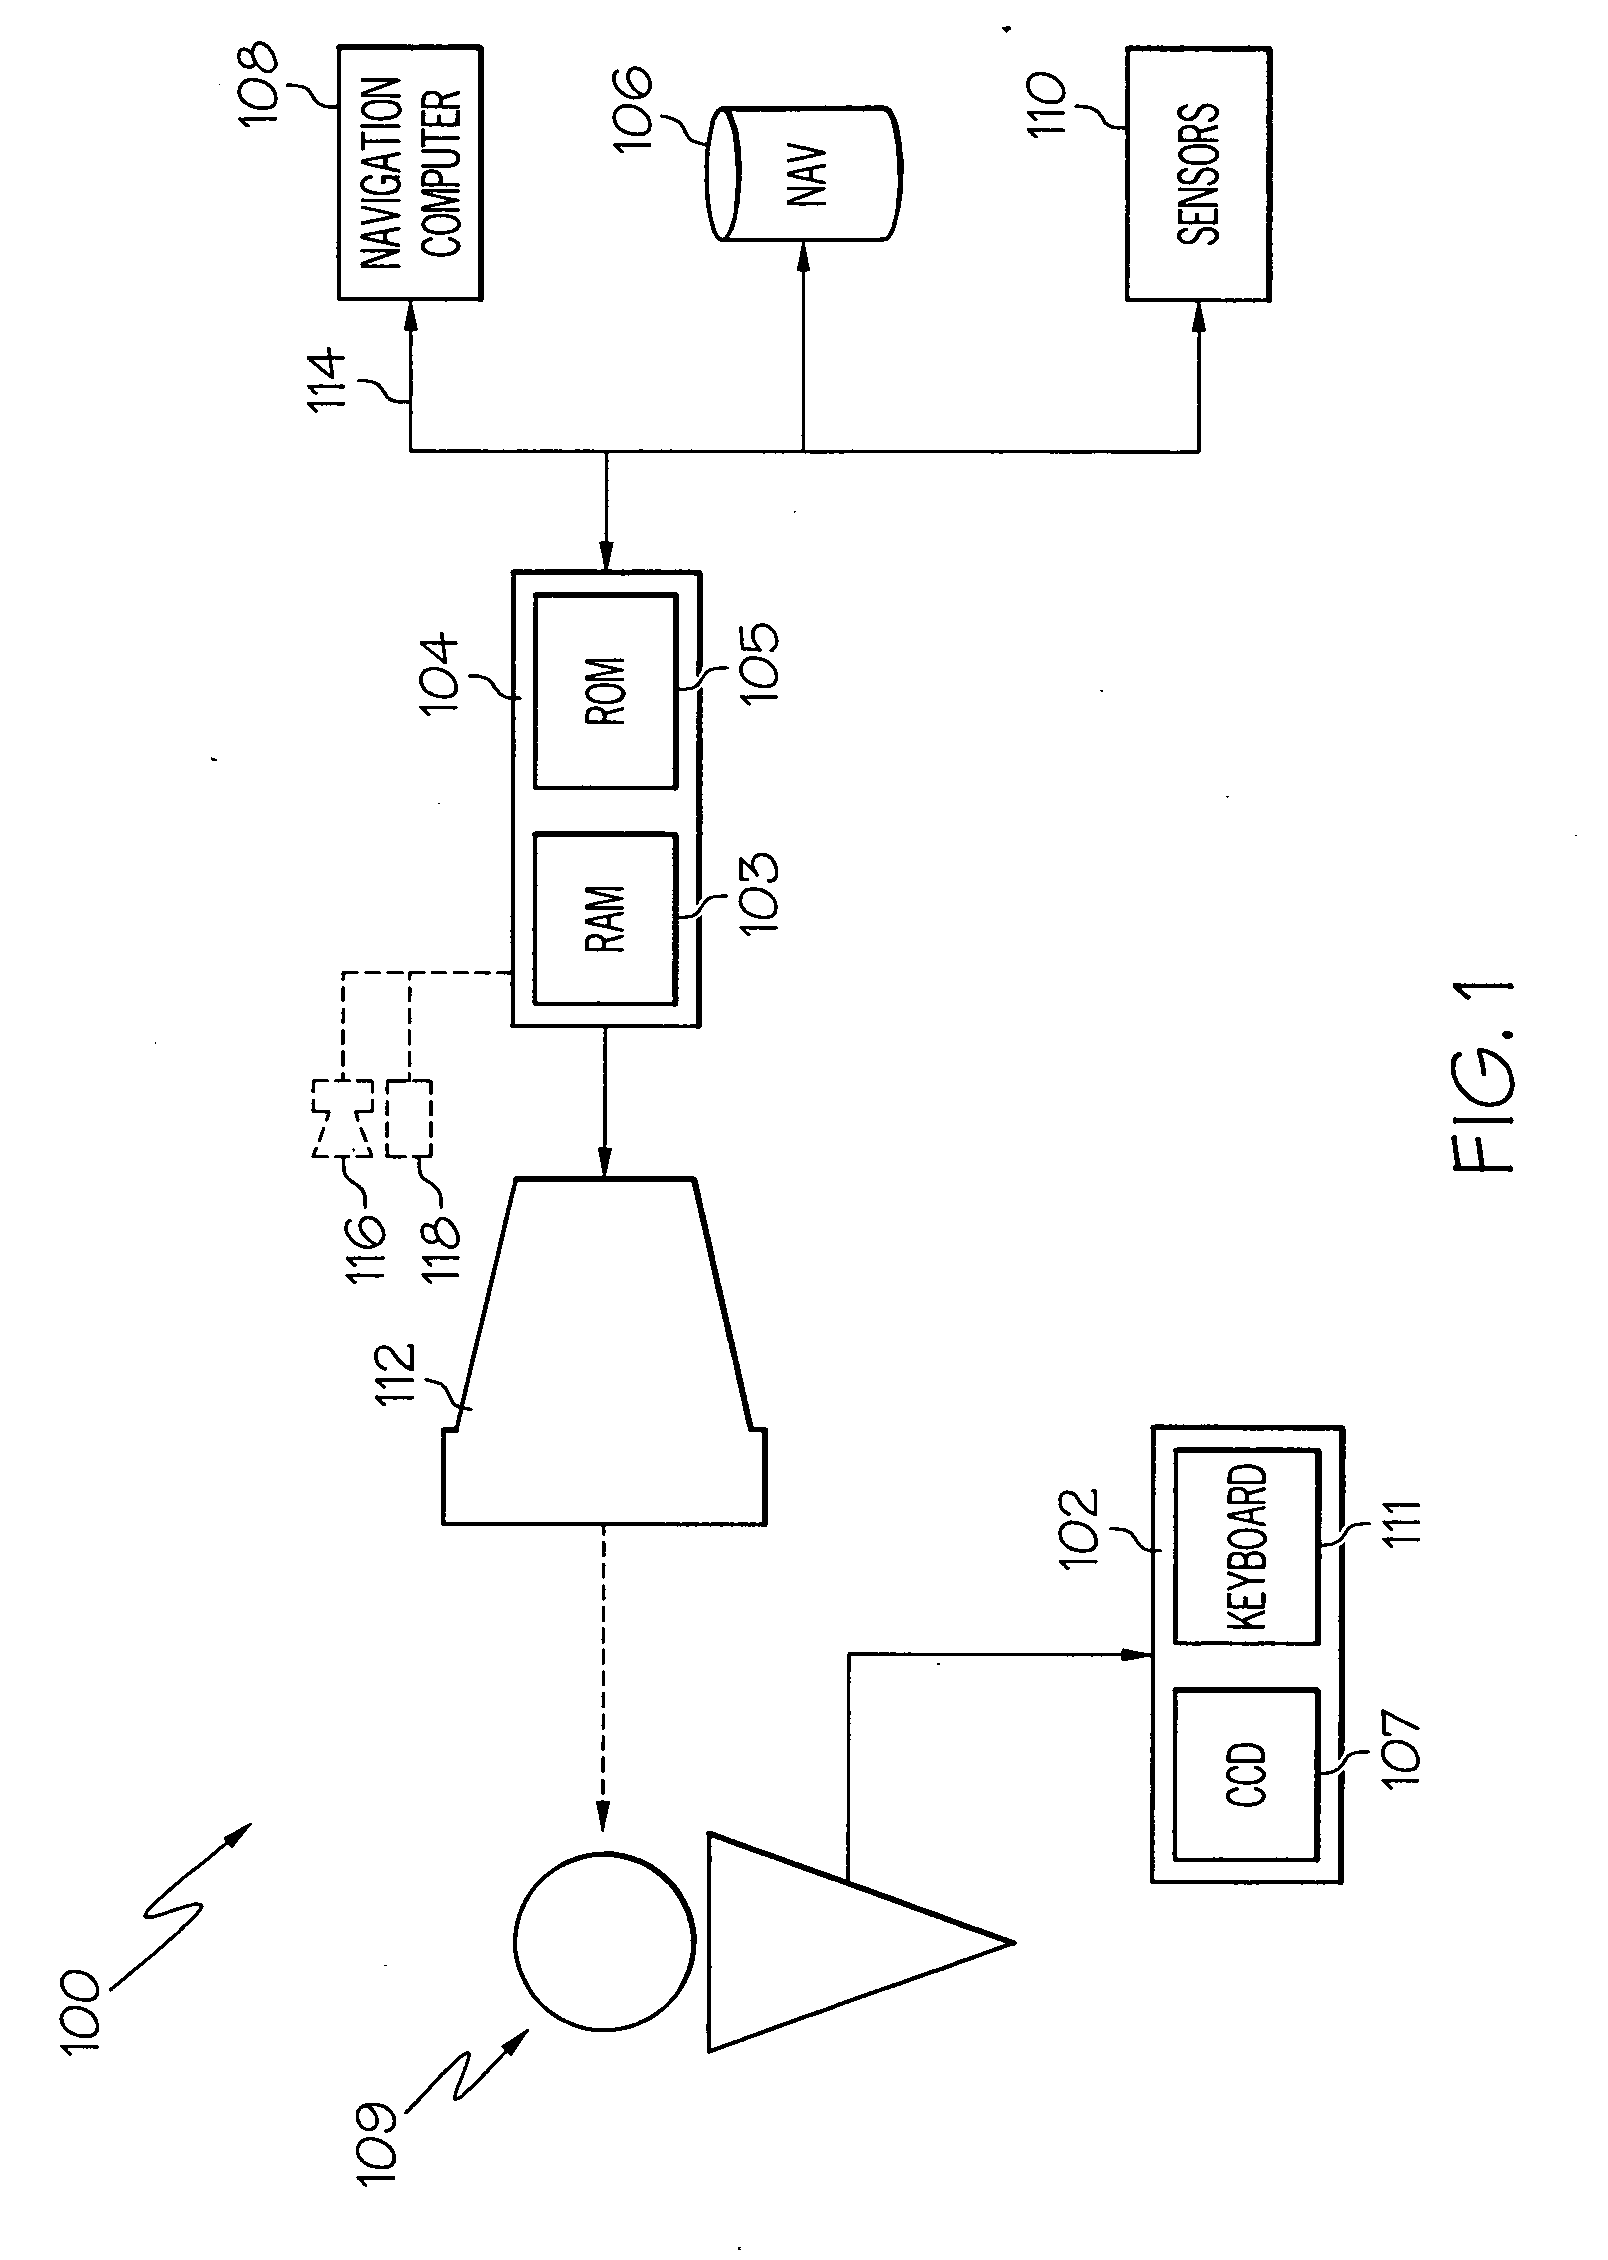 Ground incursion avoidance system and display